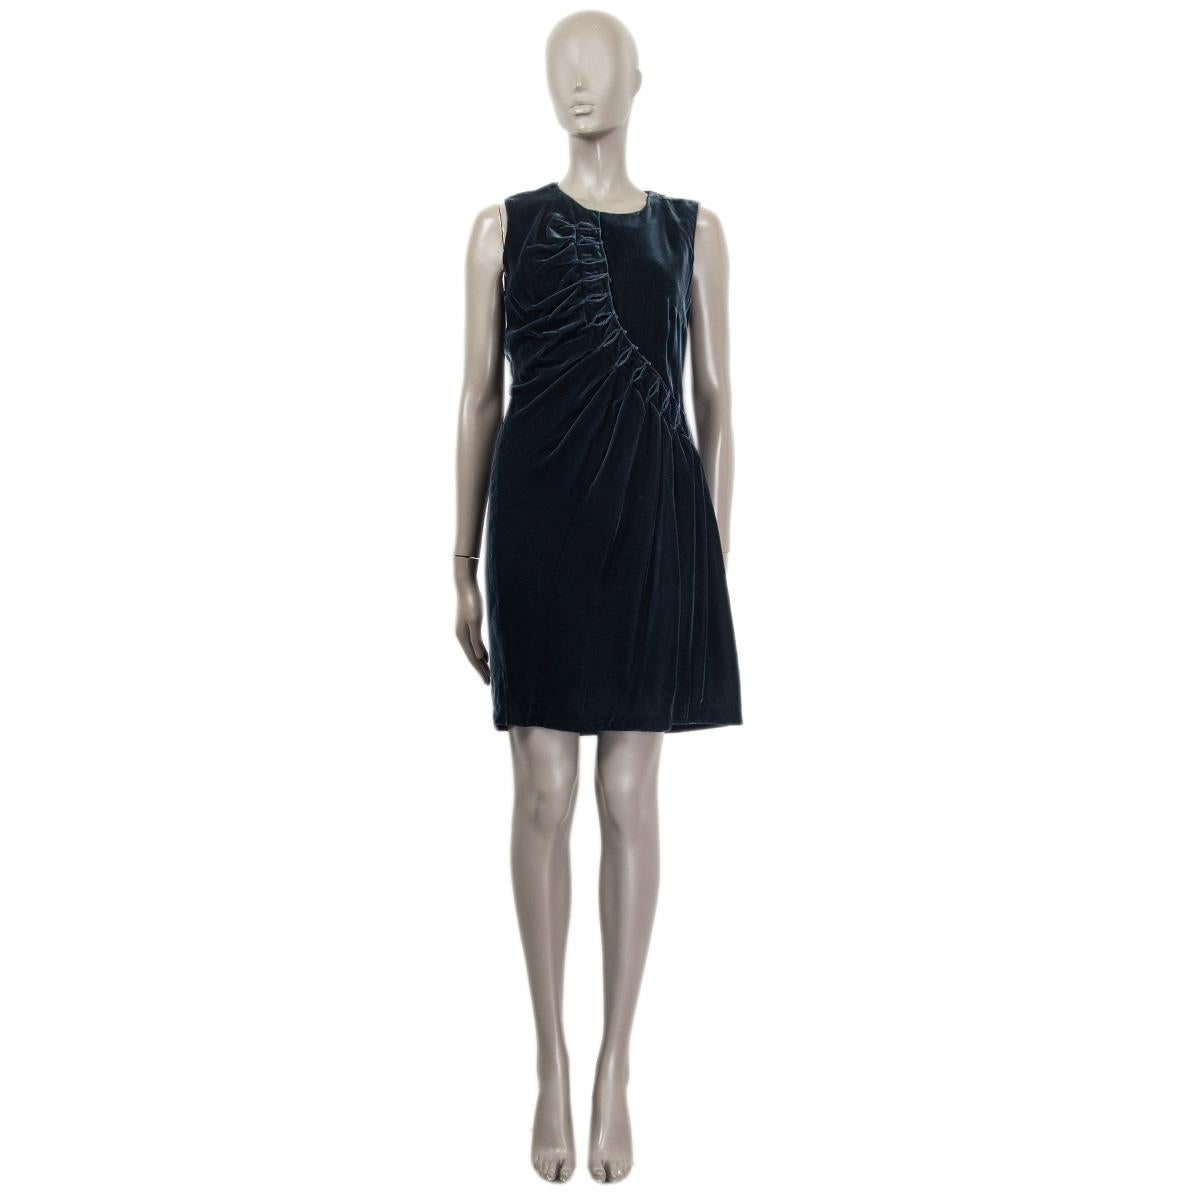 100% authentic Jil Sander sleeveless draped dress in petrol green velvet (content tag missing) with a draping embellishment on both the front and the back. Closes with a concealed zipper on the left shoulder and on the left side. Lined in petrol